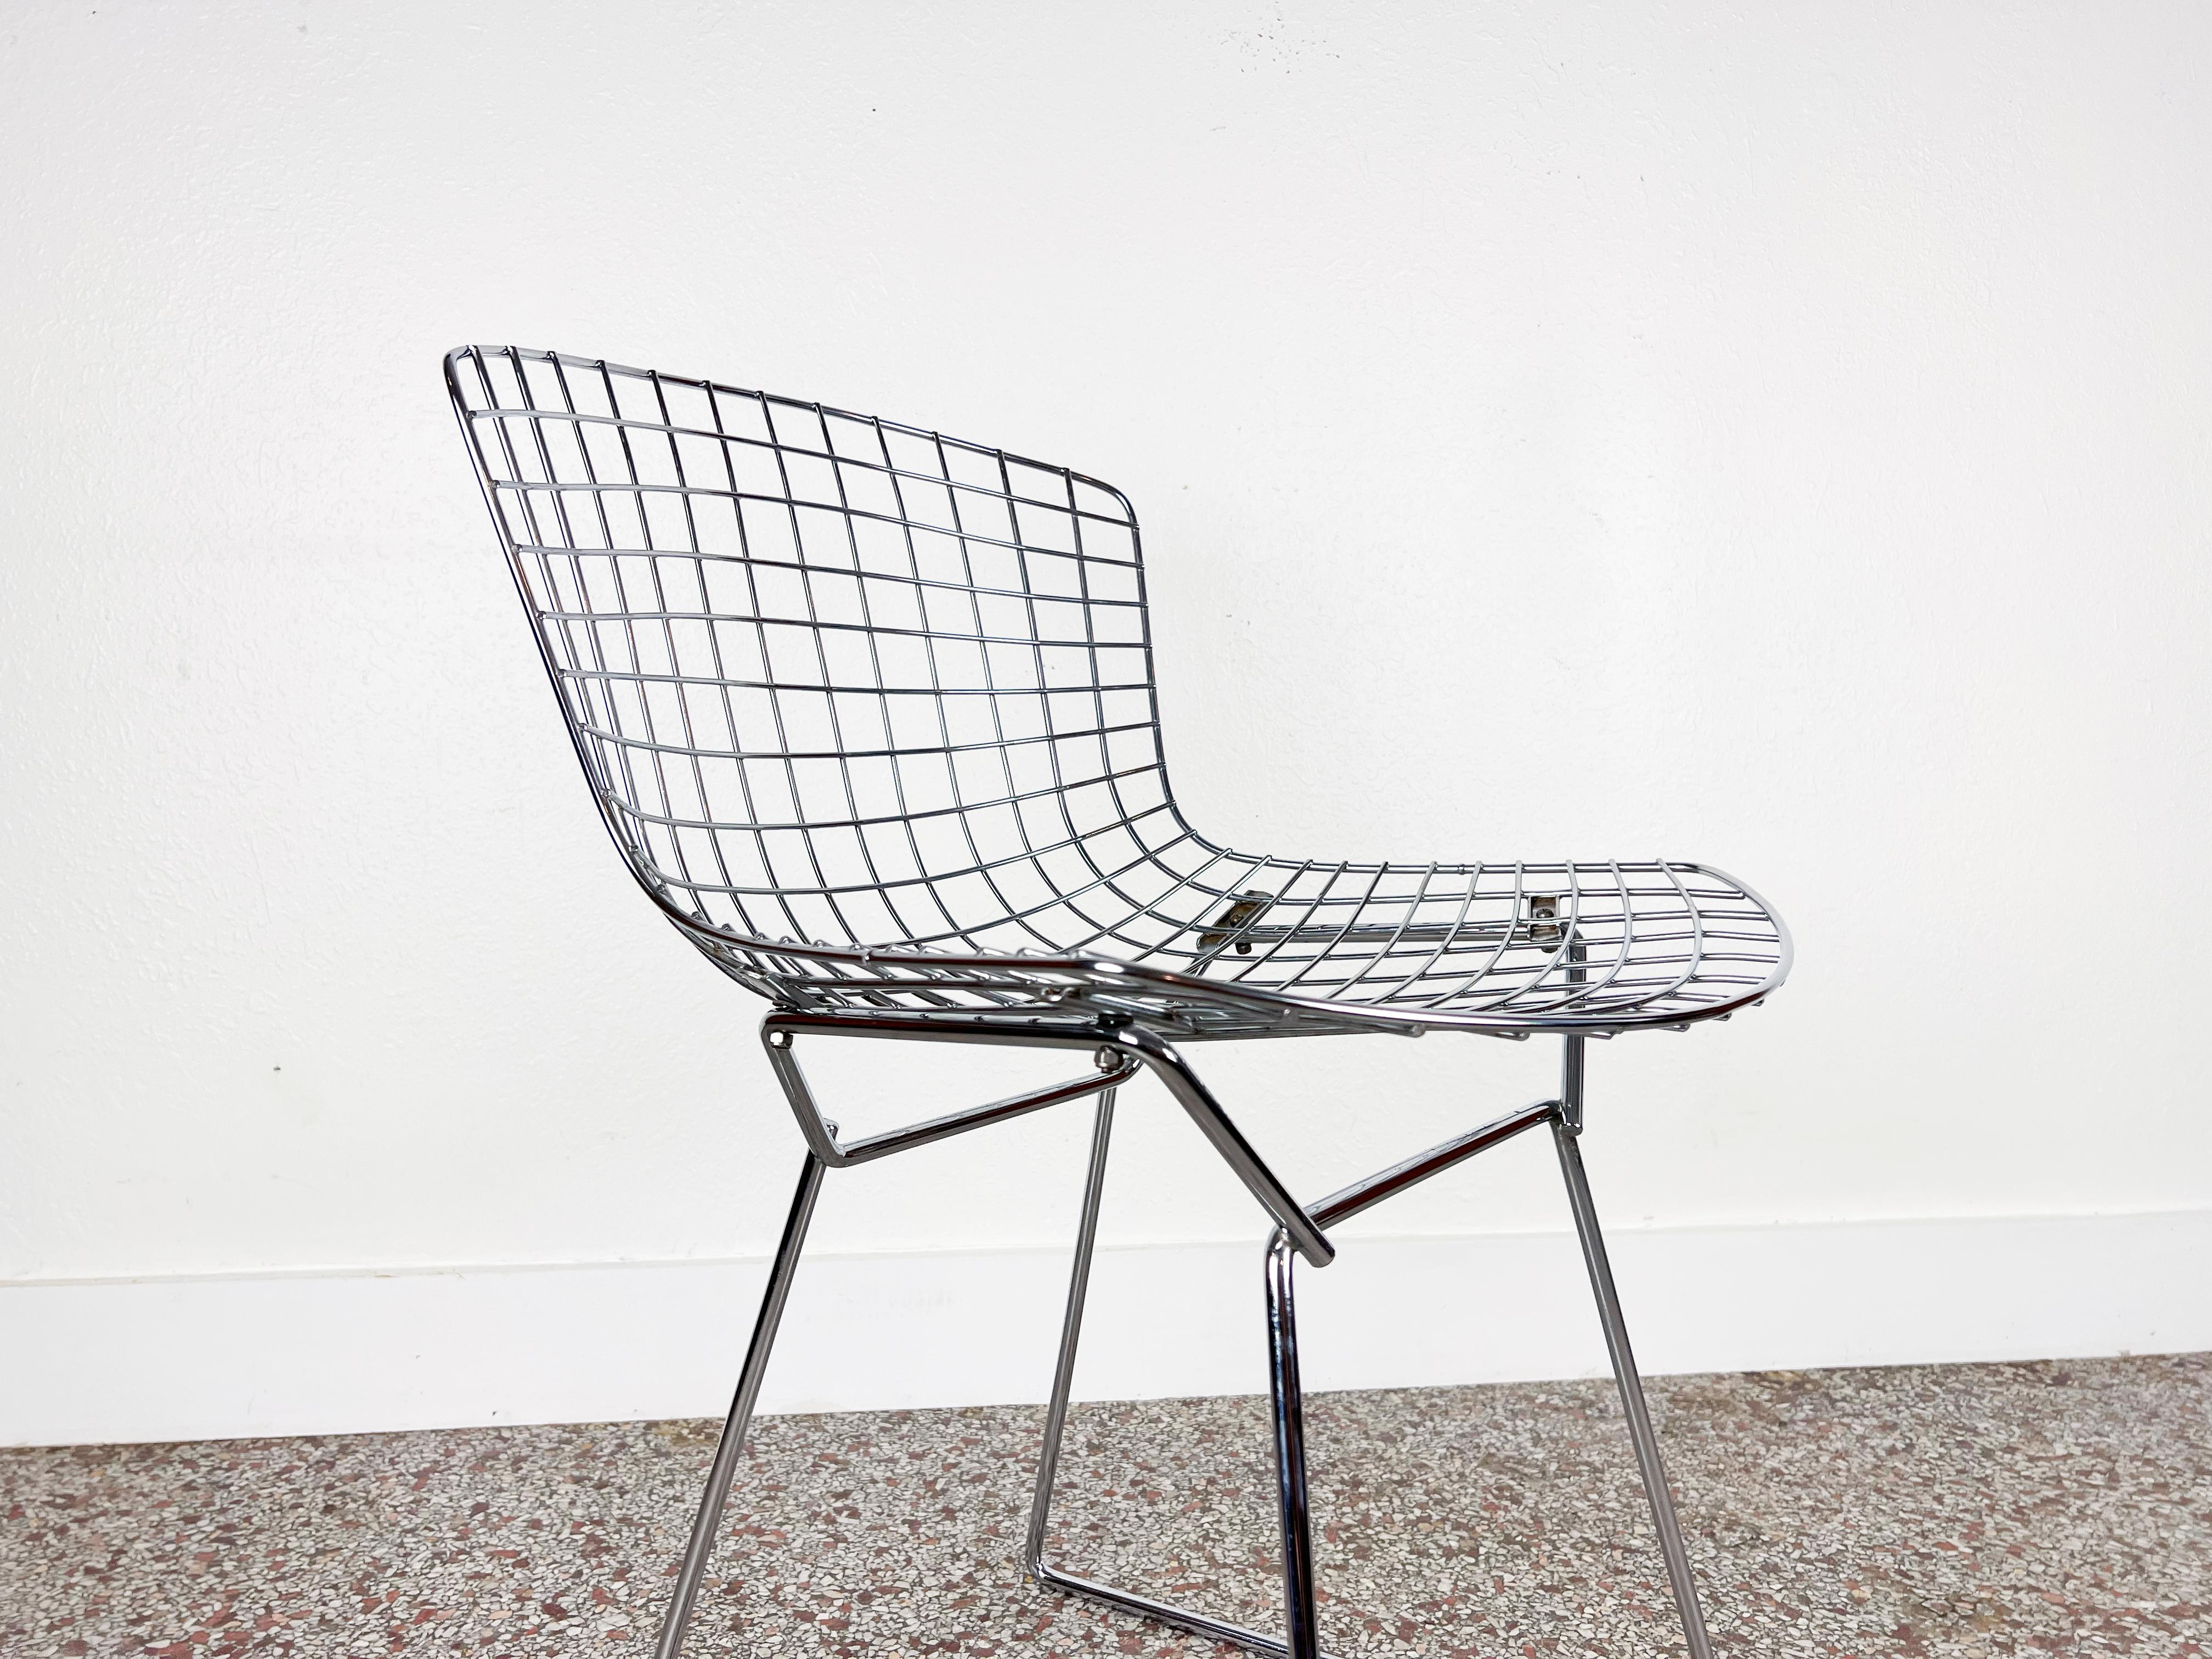 Vintage chrome mesh side chair designed by Harry Bertoia for Knoll. Comes with original beige hopsack seat pad.

Designer: Harry Bertoia 

Manufacturer: Knoll

Origin: USA

Year 1960s

Style: Mid-Century Modern

Dimensions: 21.75